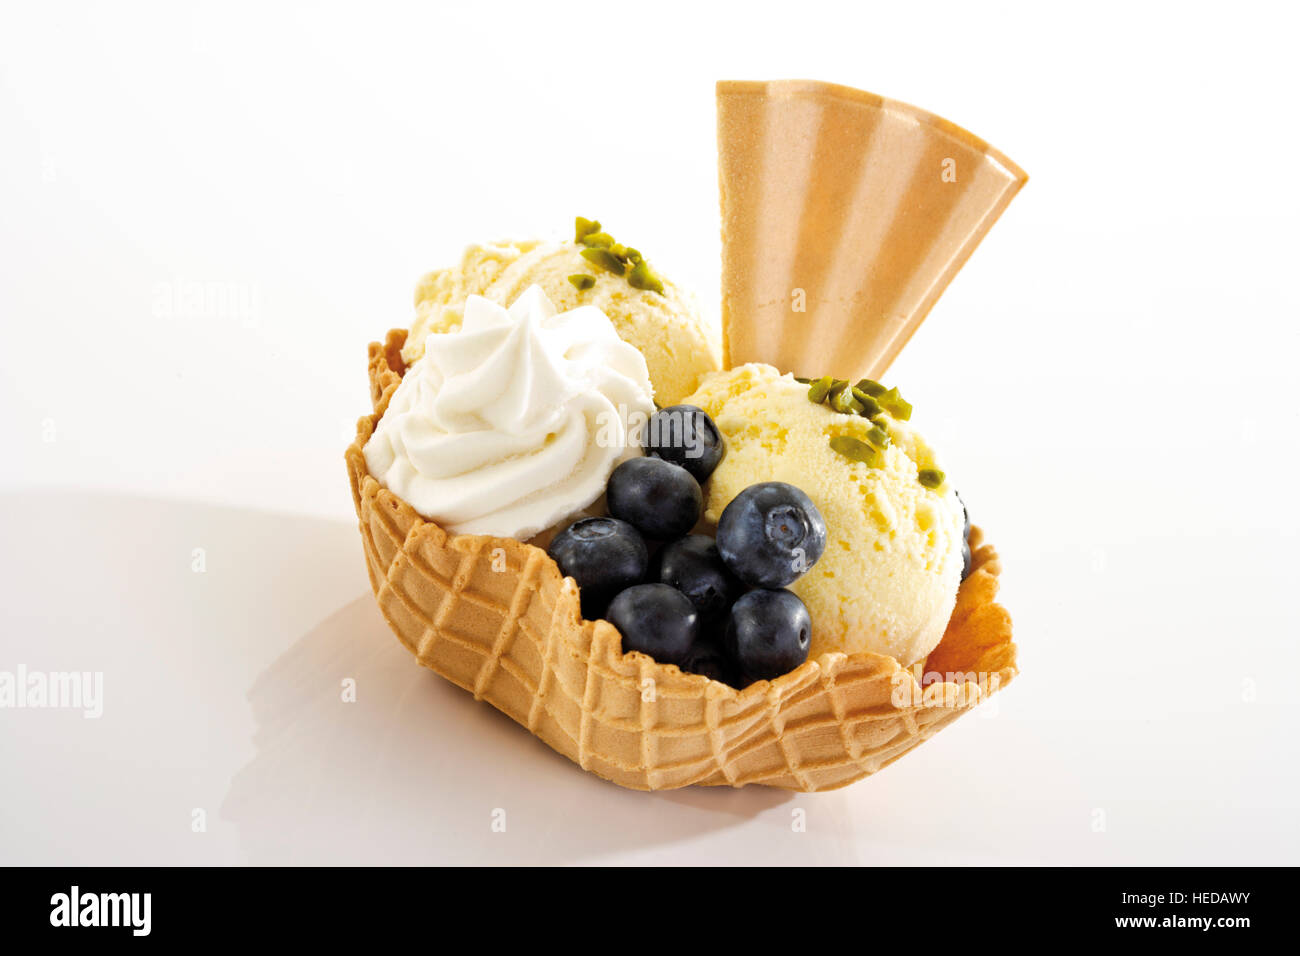 Vanilla ice cream, blueberries, whipped cream and a fan-shaped wafer in a wafer bowl Stock Photo